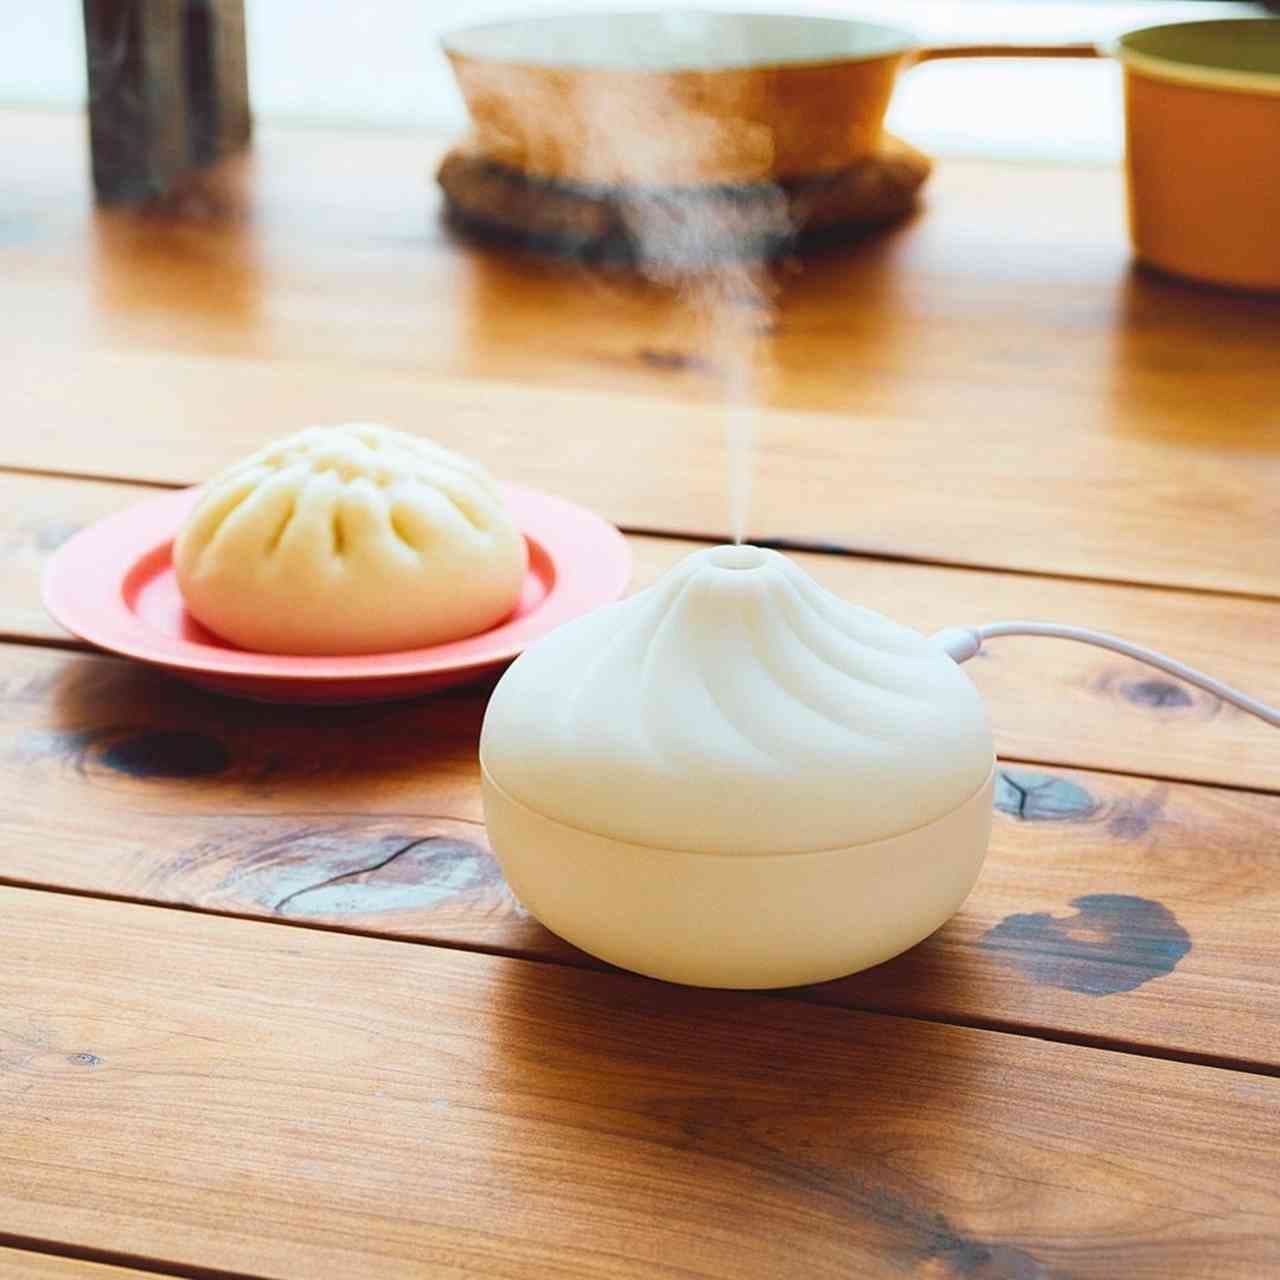 Shinjuku Nakamuraya official approval: Humidifier BOOK that looks just like steamed meat buns.